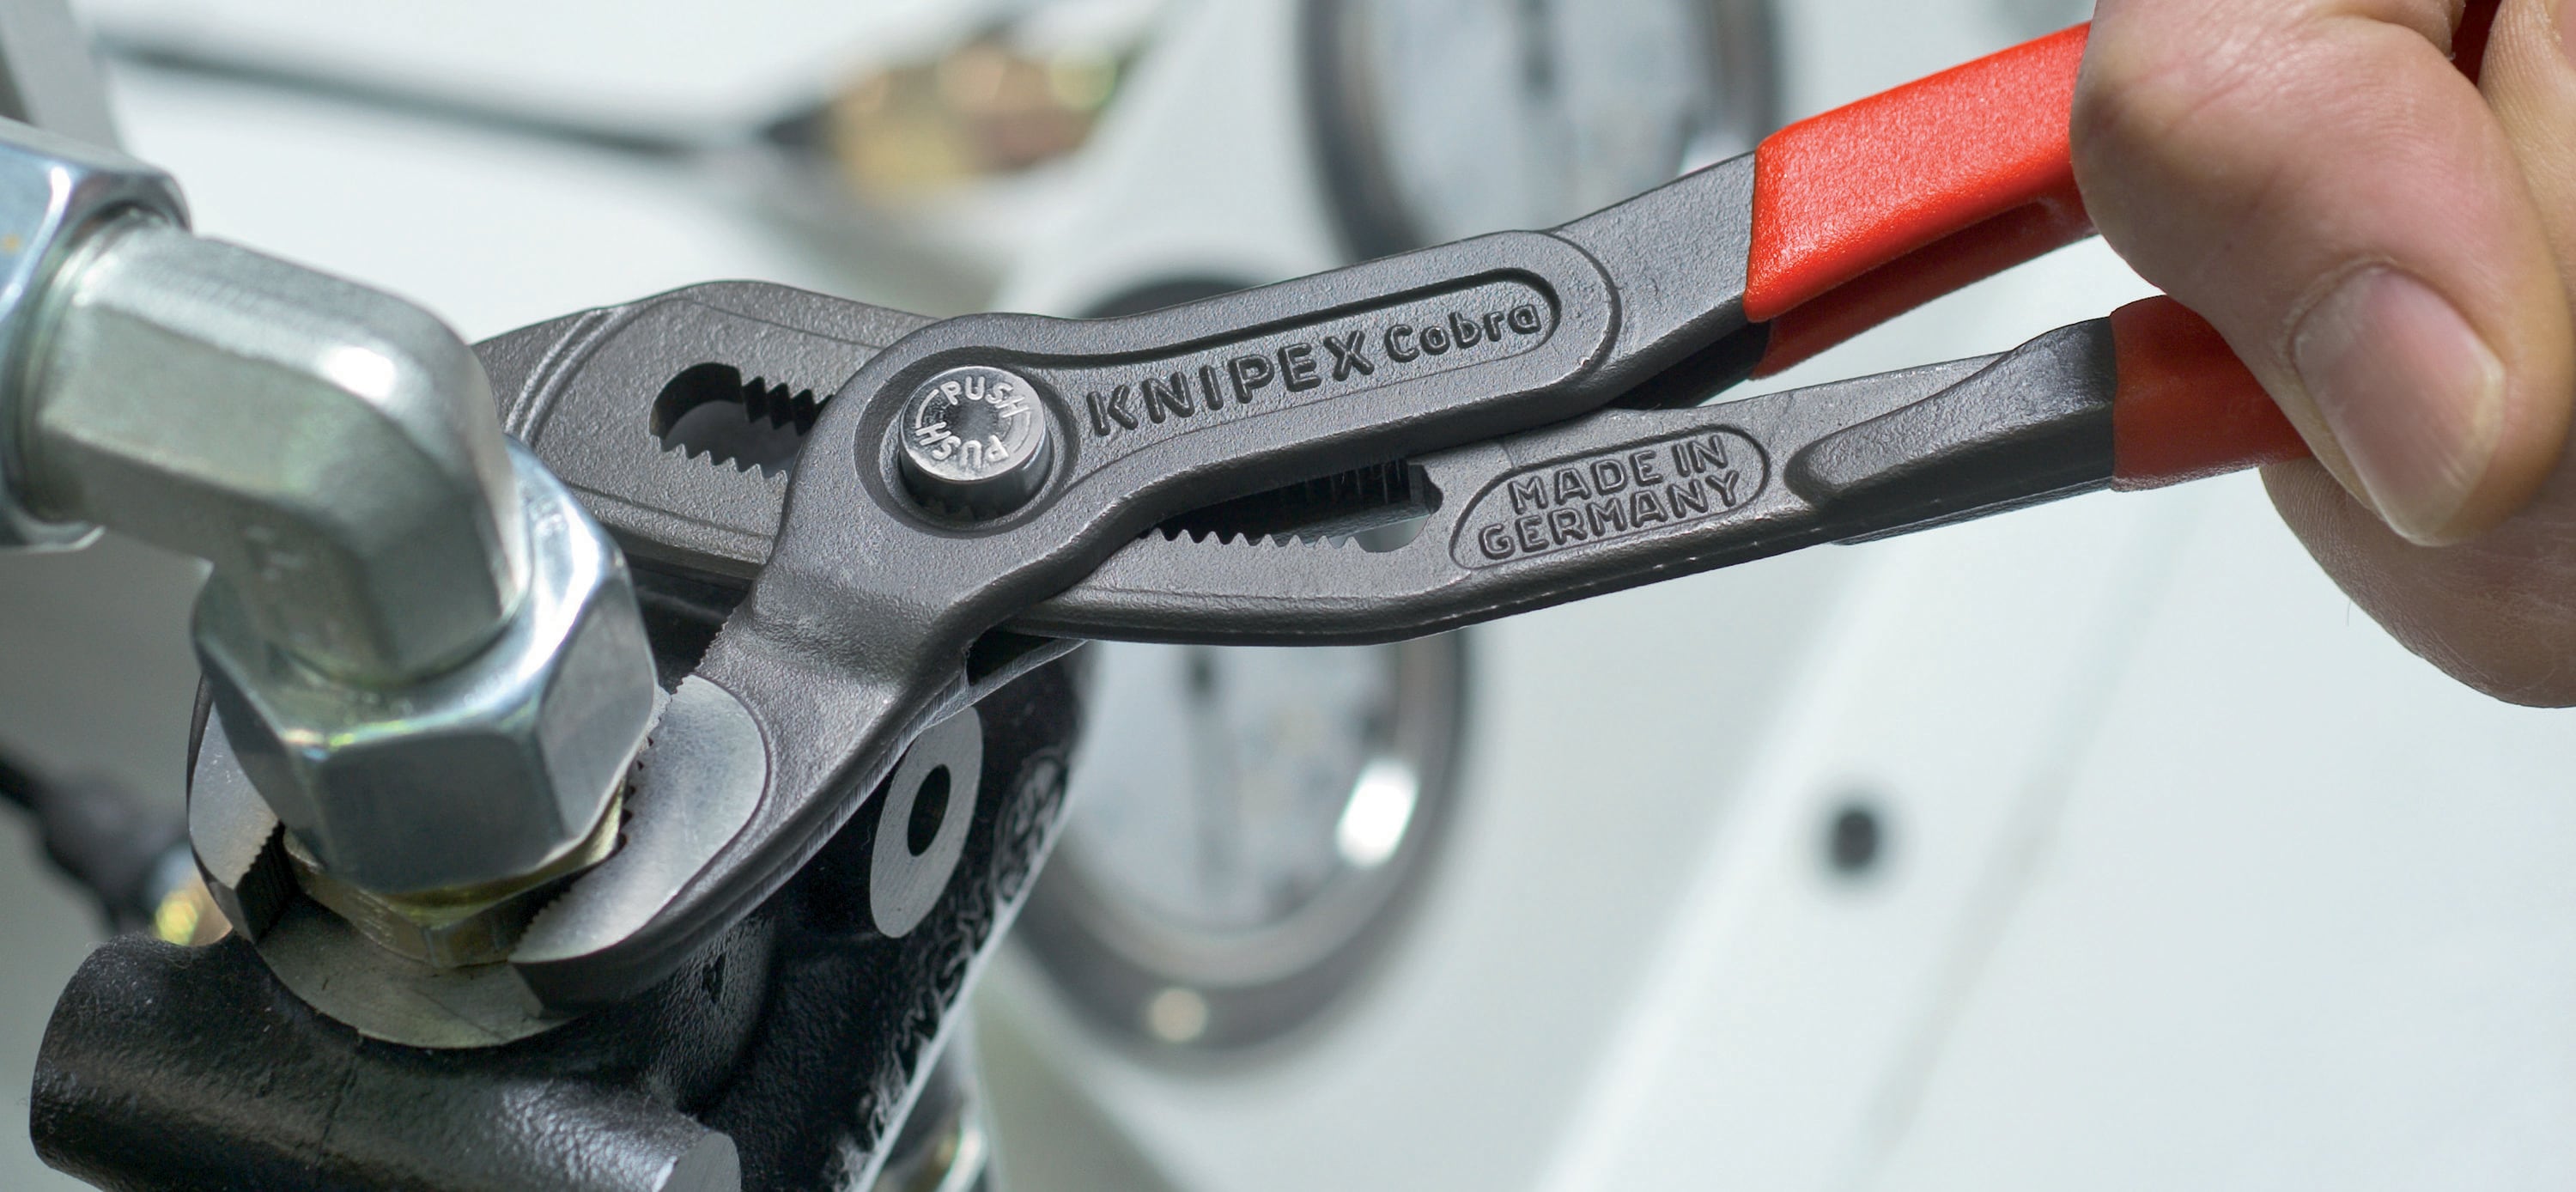 Knipex 10 Inches Water Pump Pliers